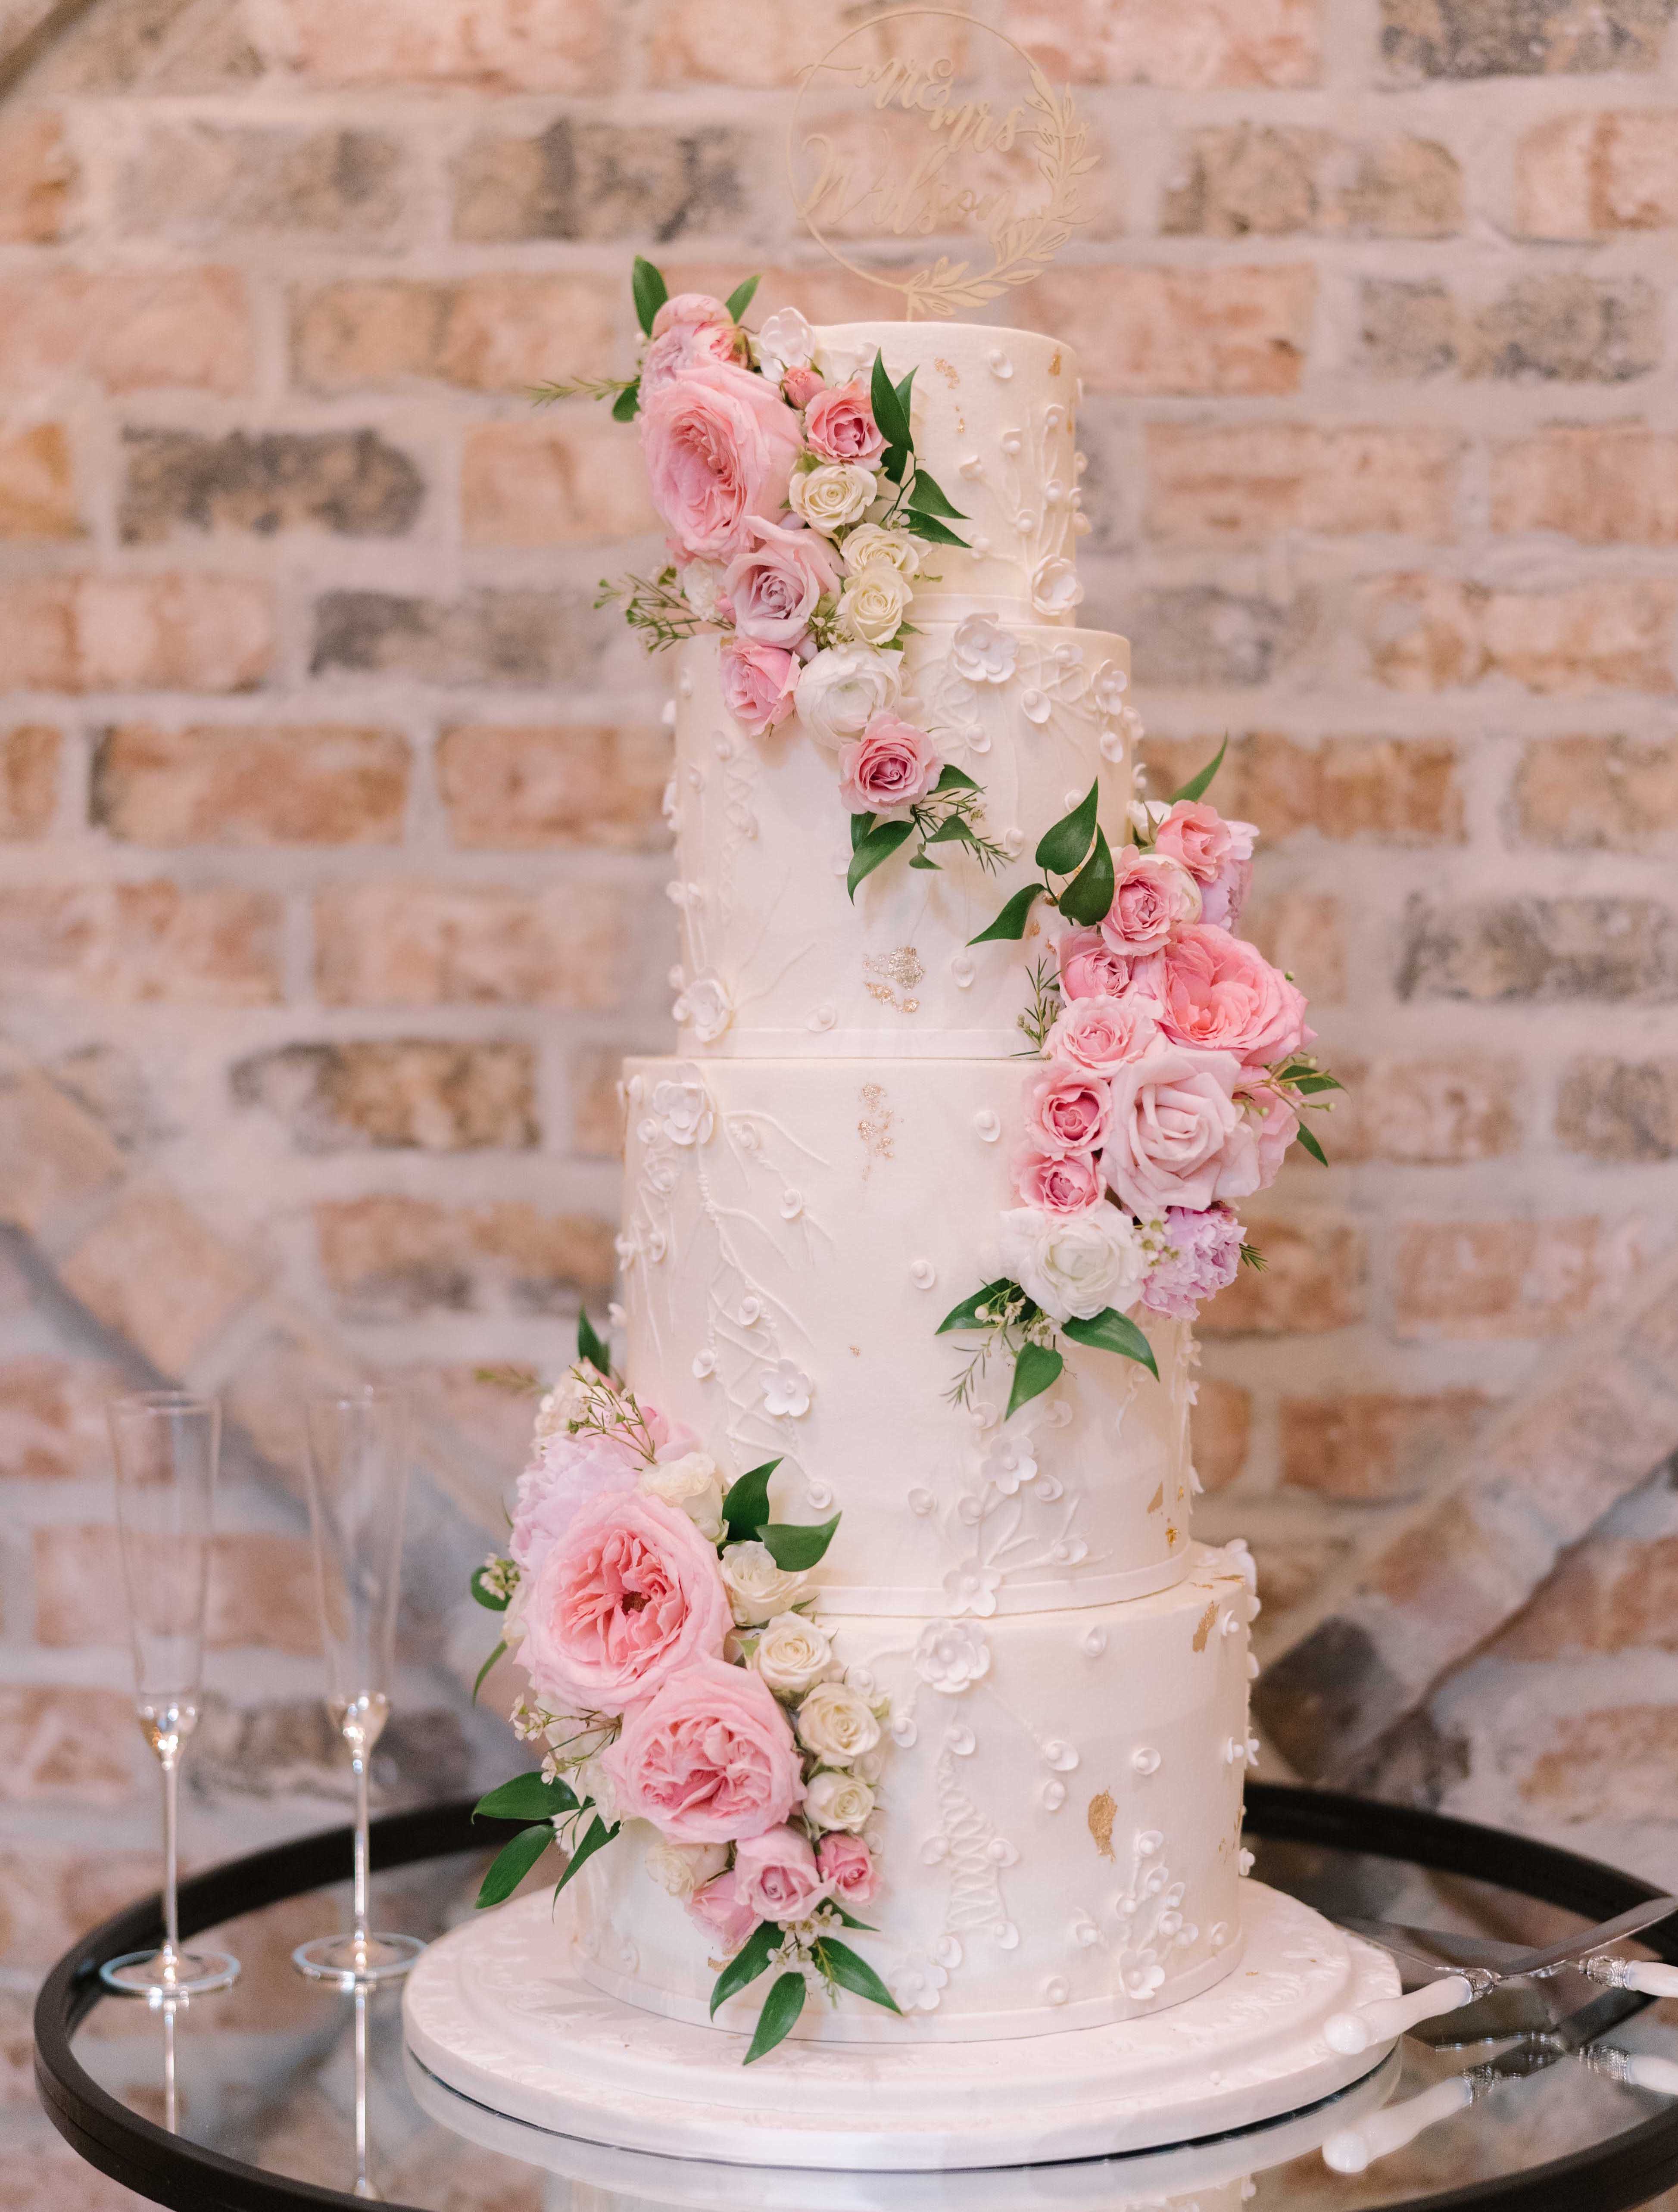 A four-tier white wedding cake with 3D floral embellishments and pink cake flowers trailing up the sides. Summer Wedding With a Vibrant Palette of Pink